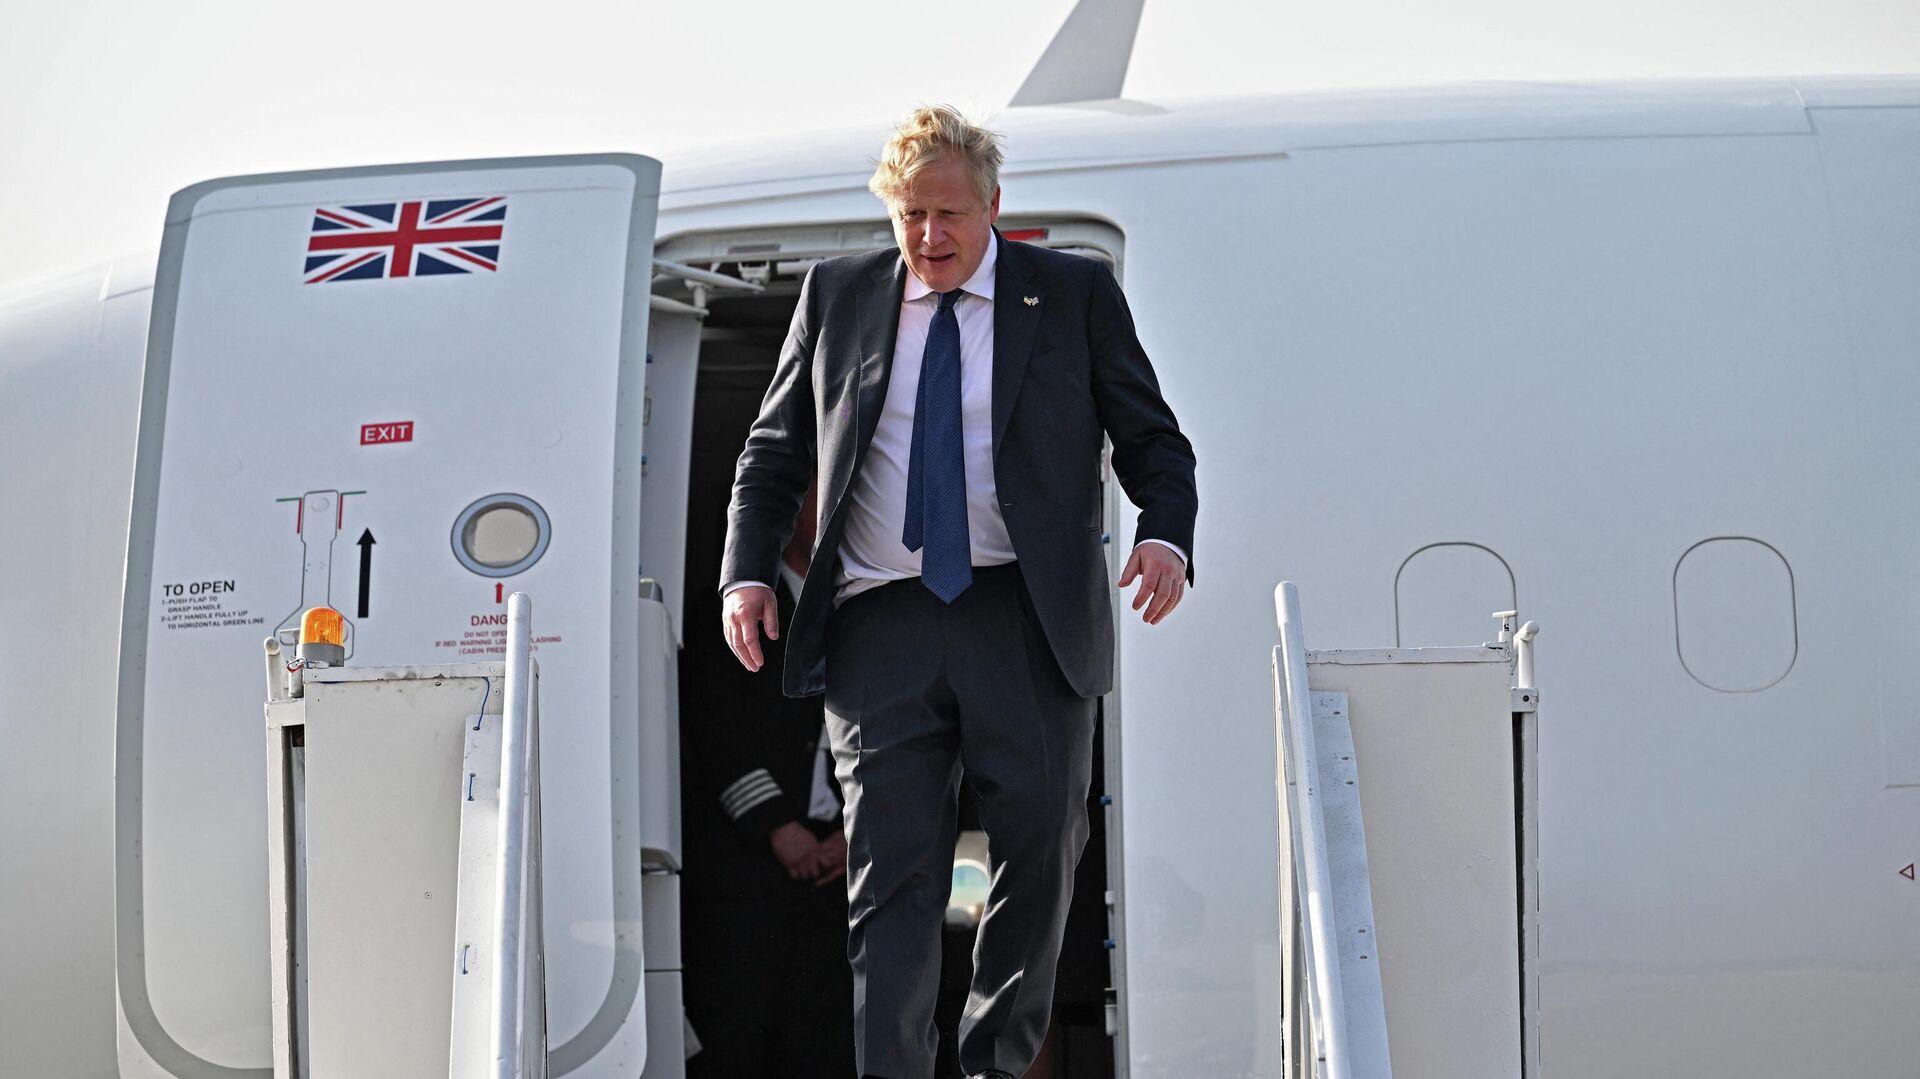 Britain's Prime Minister Boris Johnson disembarks from a plane upon his arrival at the airport in Ahmedabad on April 21, 2022 - Sputnik International, 1920, 22.04.2022